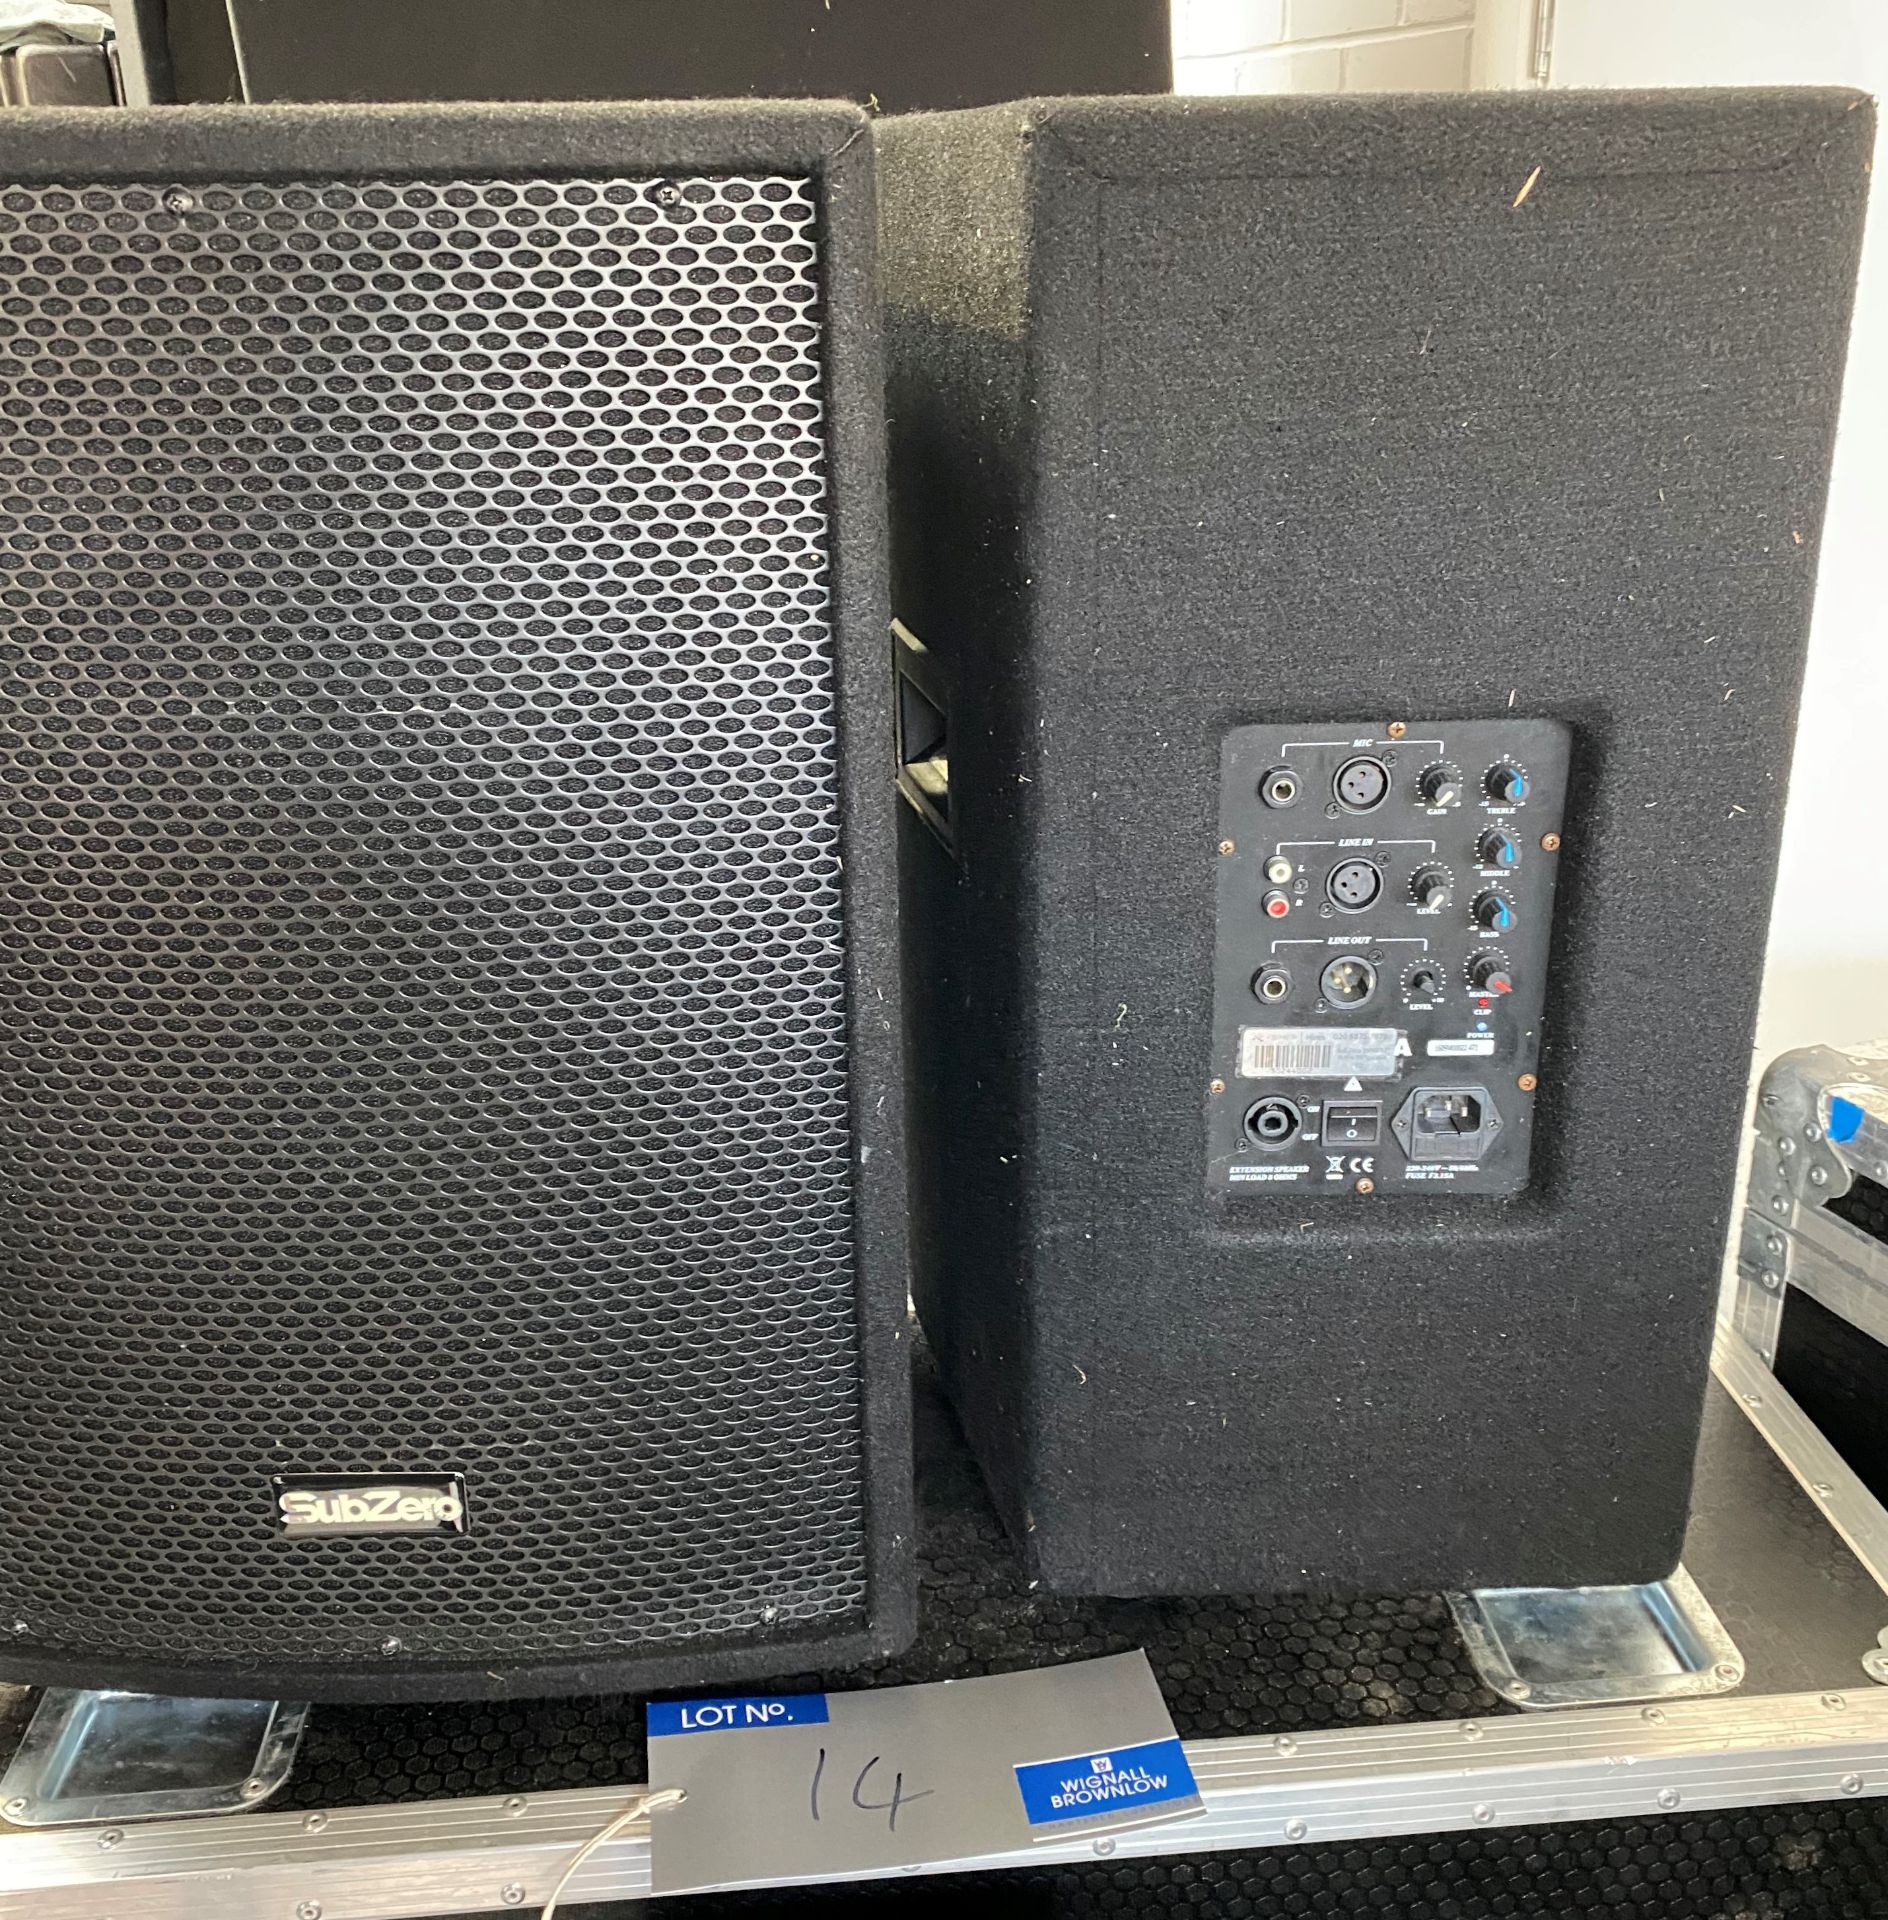 2 SubZero 350w 12in Active PA Speakers with pole mount and mobile flight case (in working order).